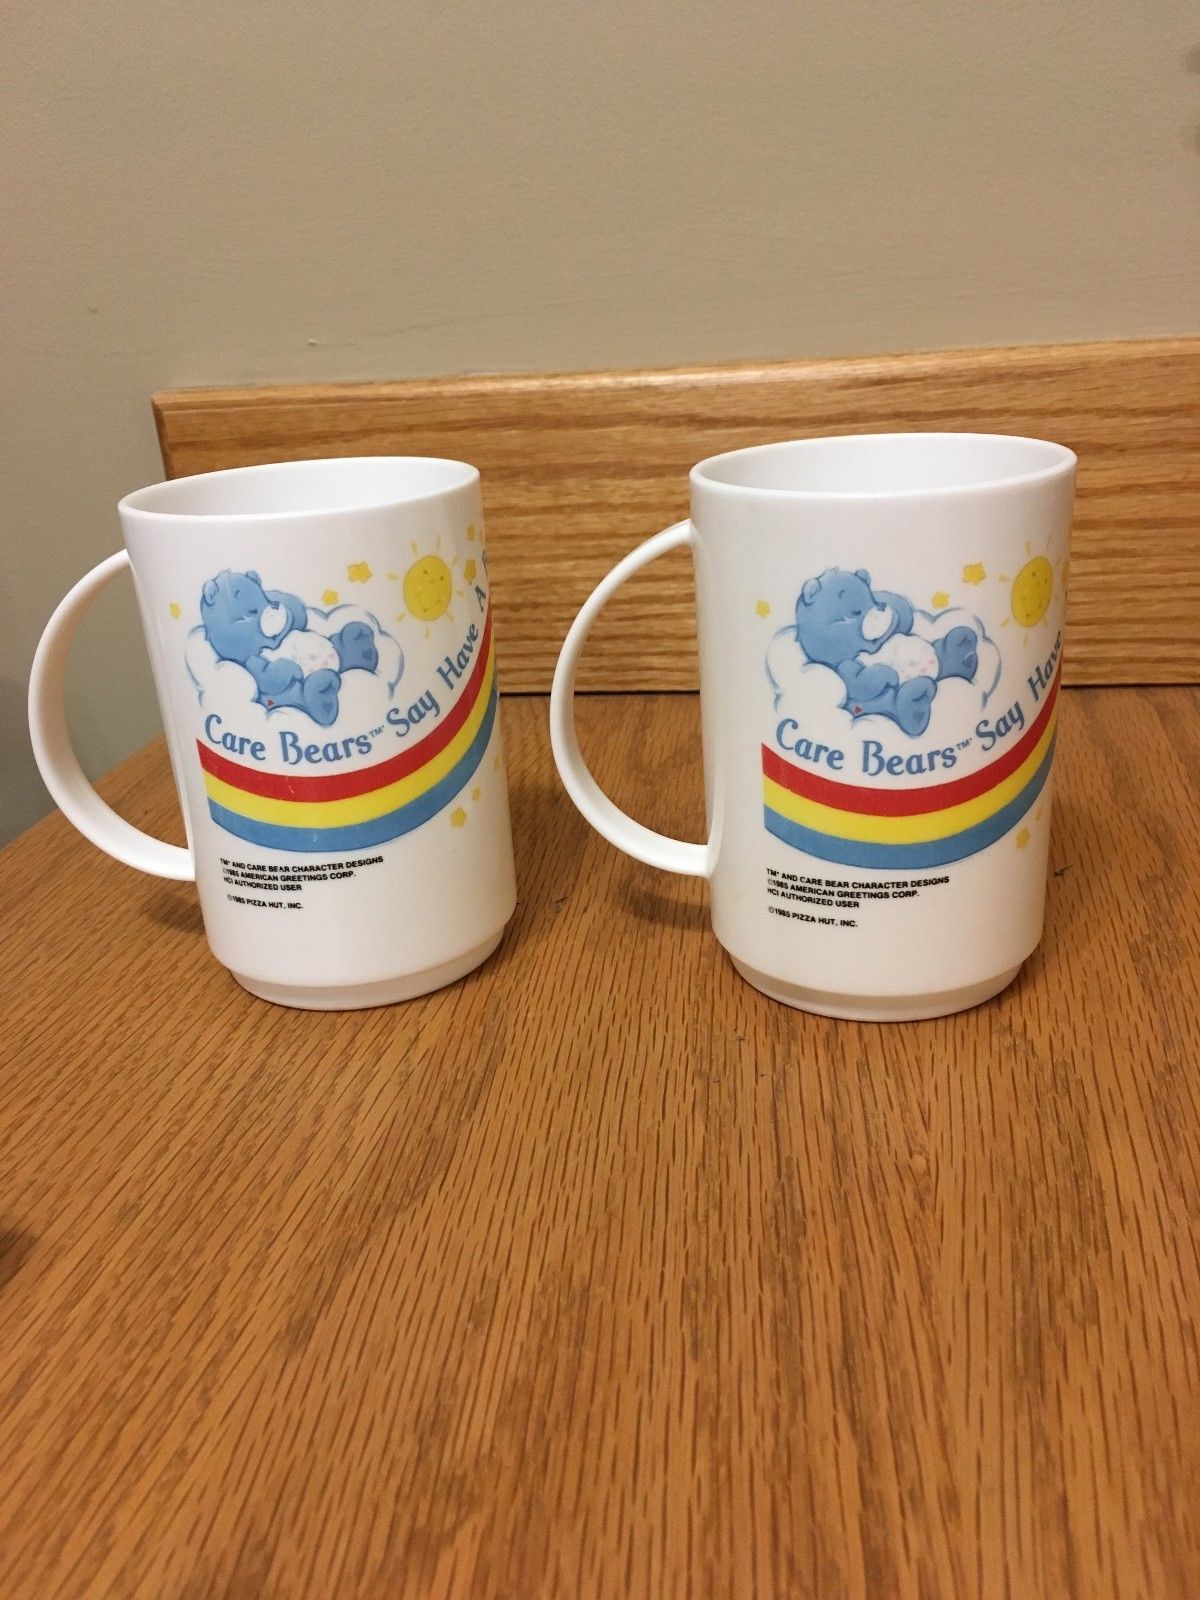 Vintage 1985 Care Bears Plastic Kids Cups/Mugs from Pizza Hut